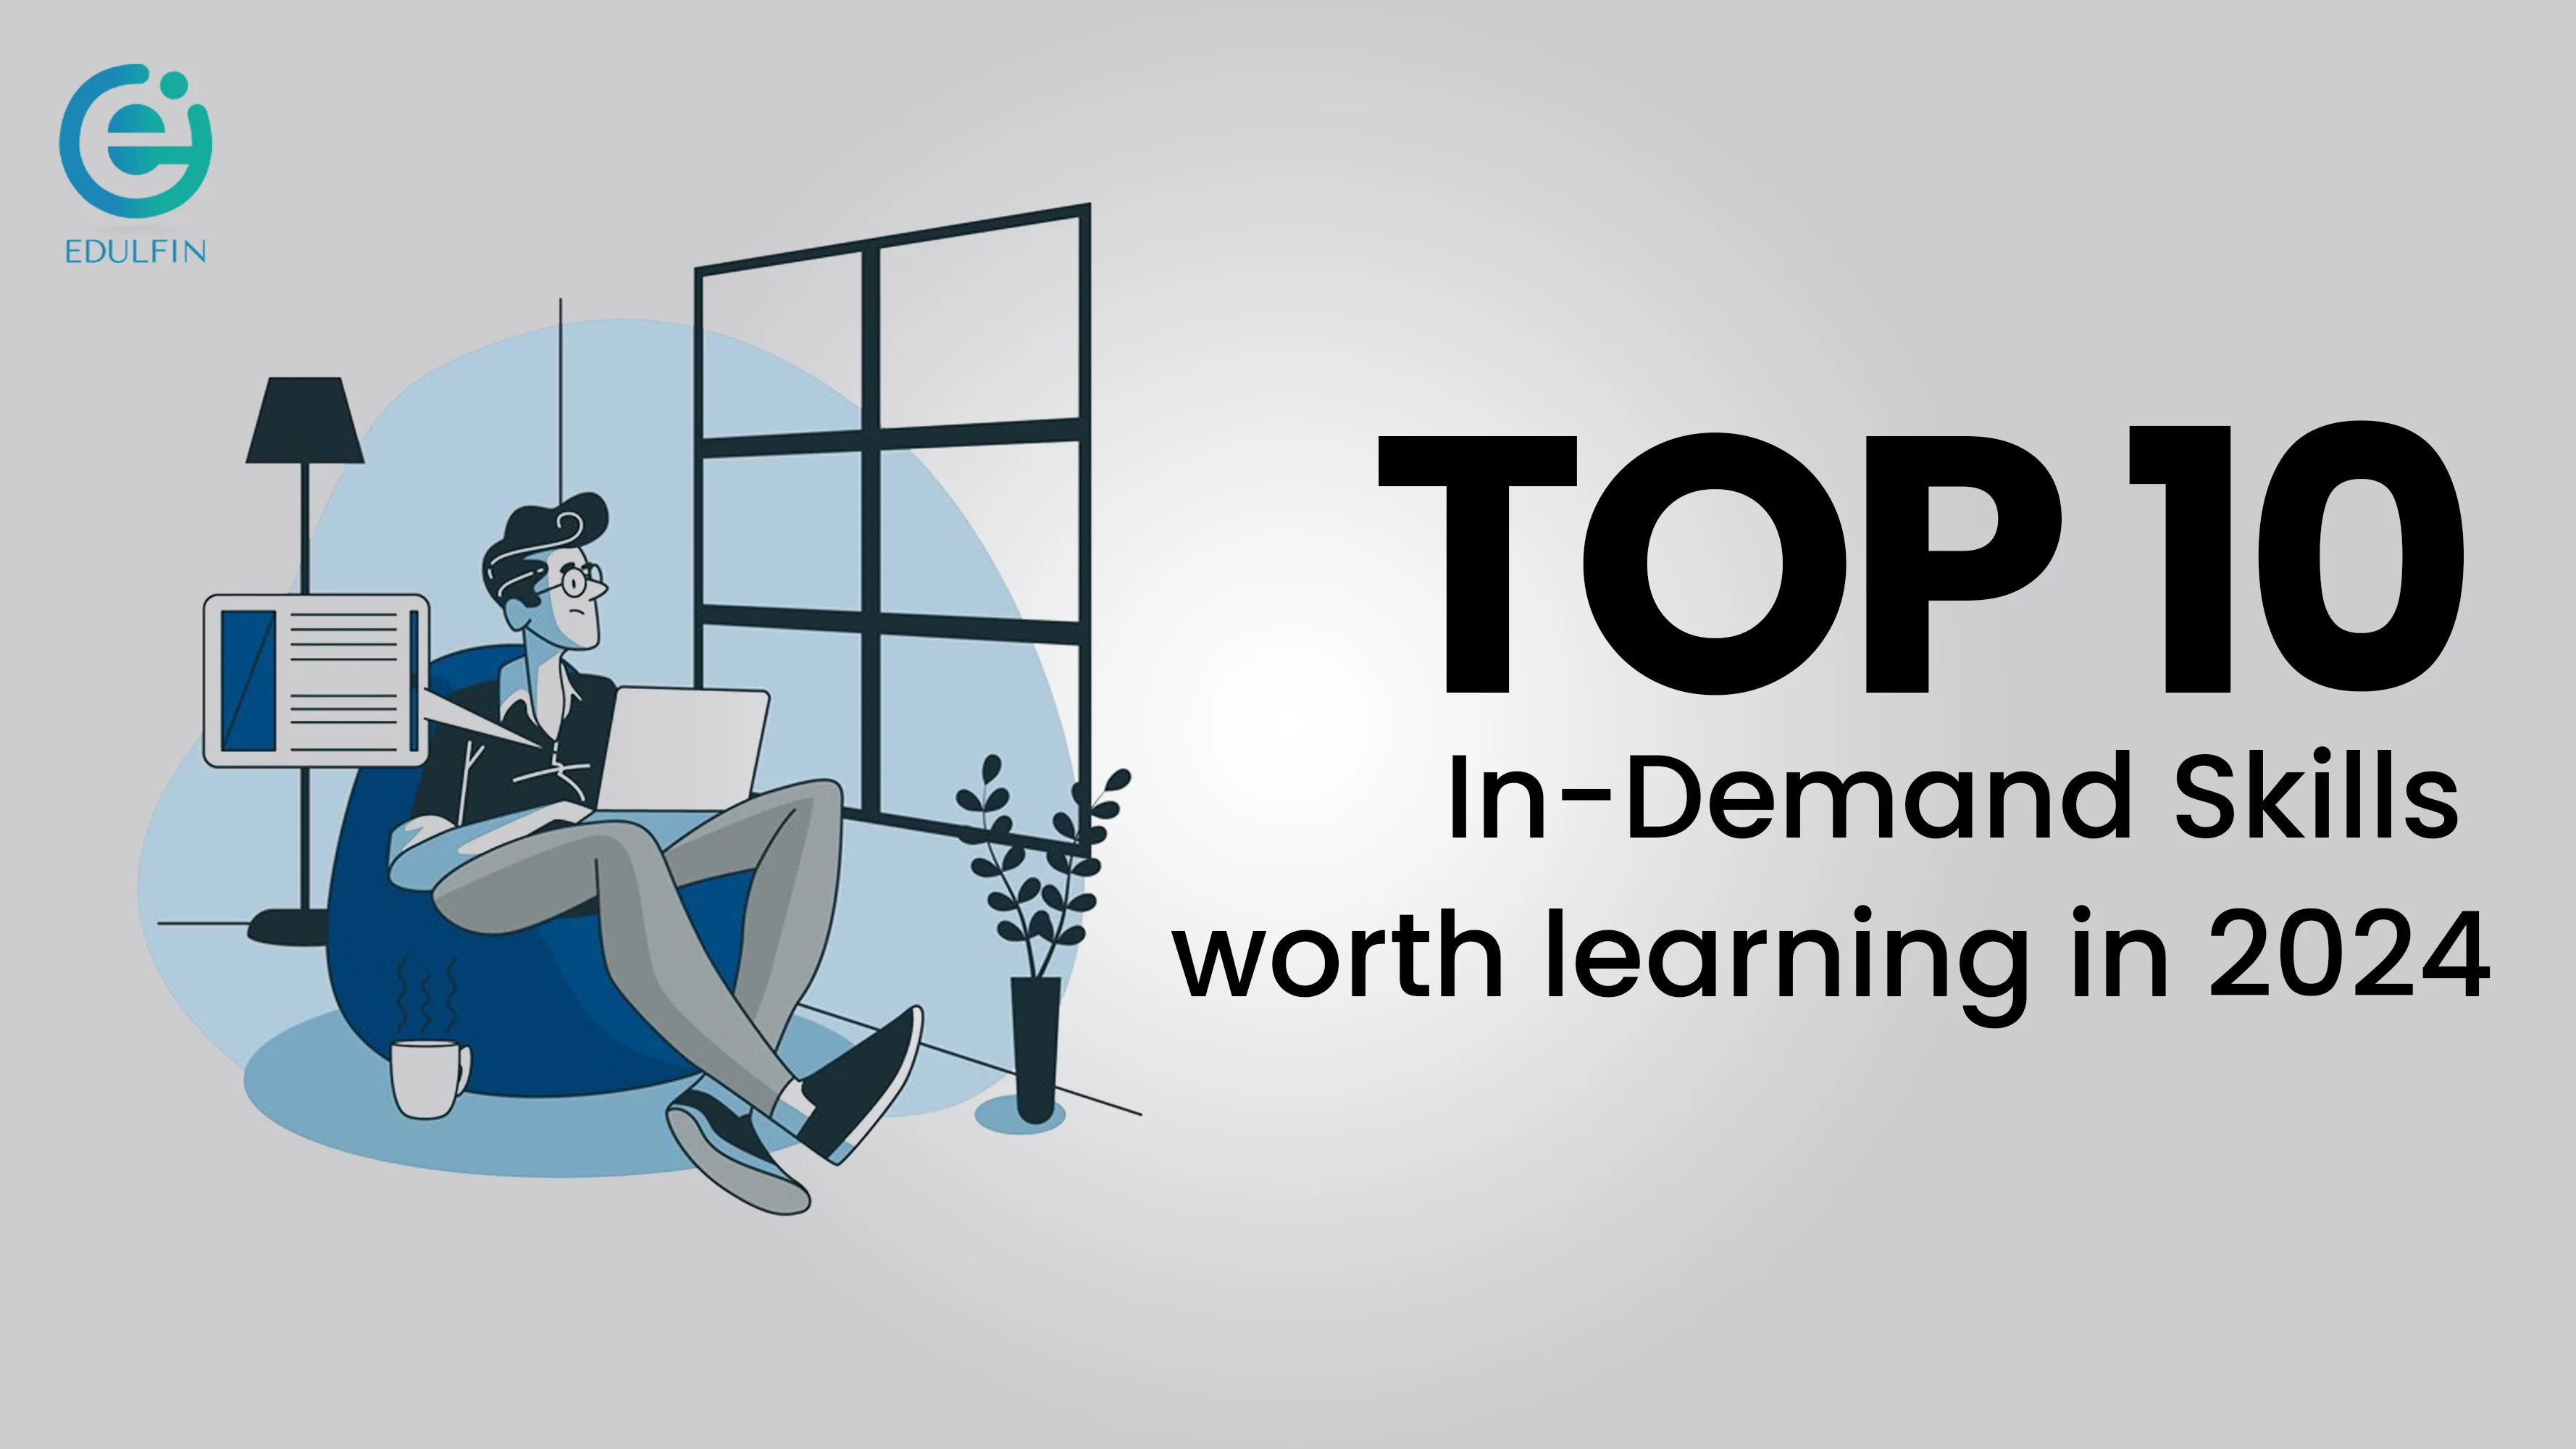 Top 10 In-Demand Skills Worth Learning in 2024: Stay Ahead of the Curve